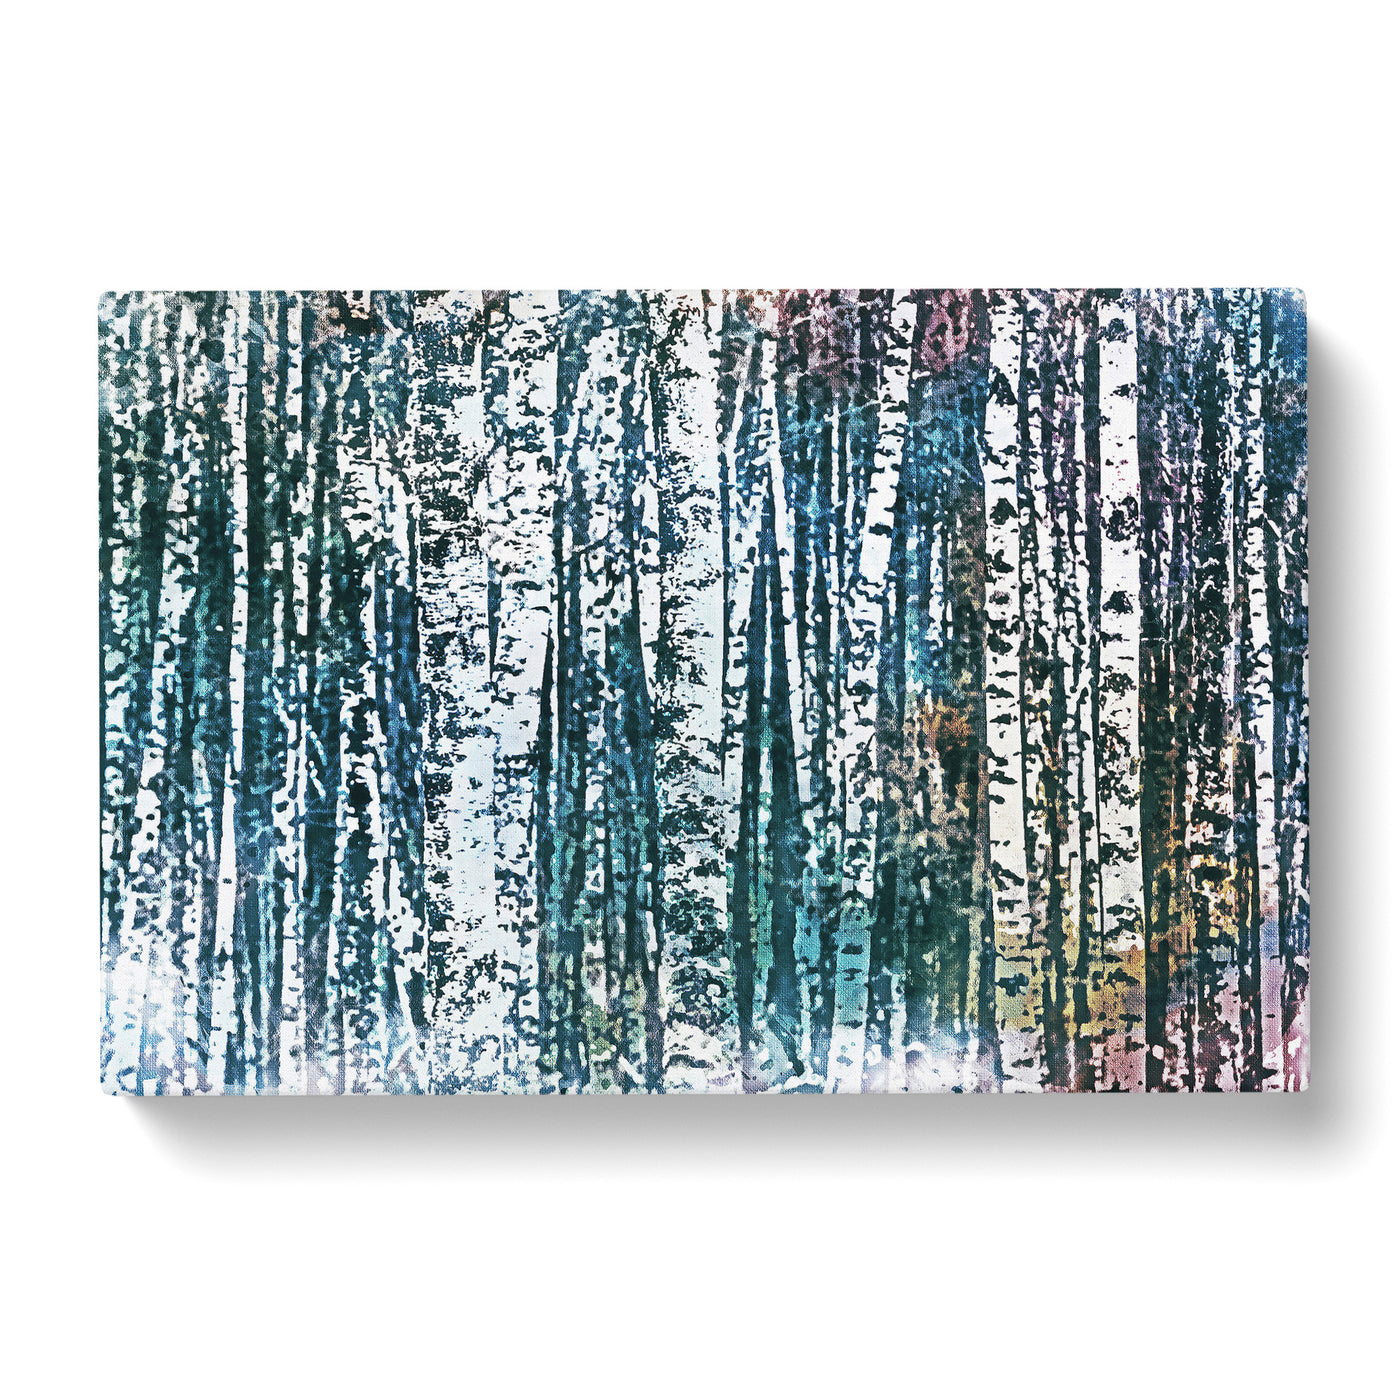 A Birch Treeforest In Abstract Canvas Print Main Image